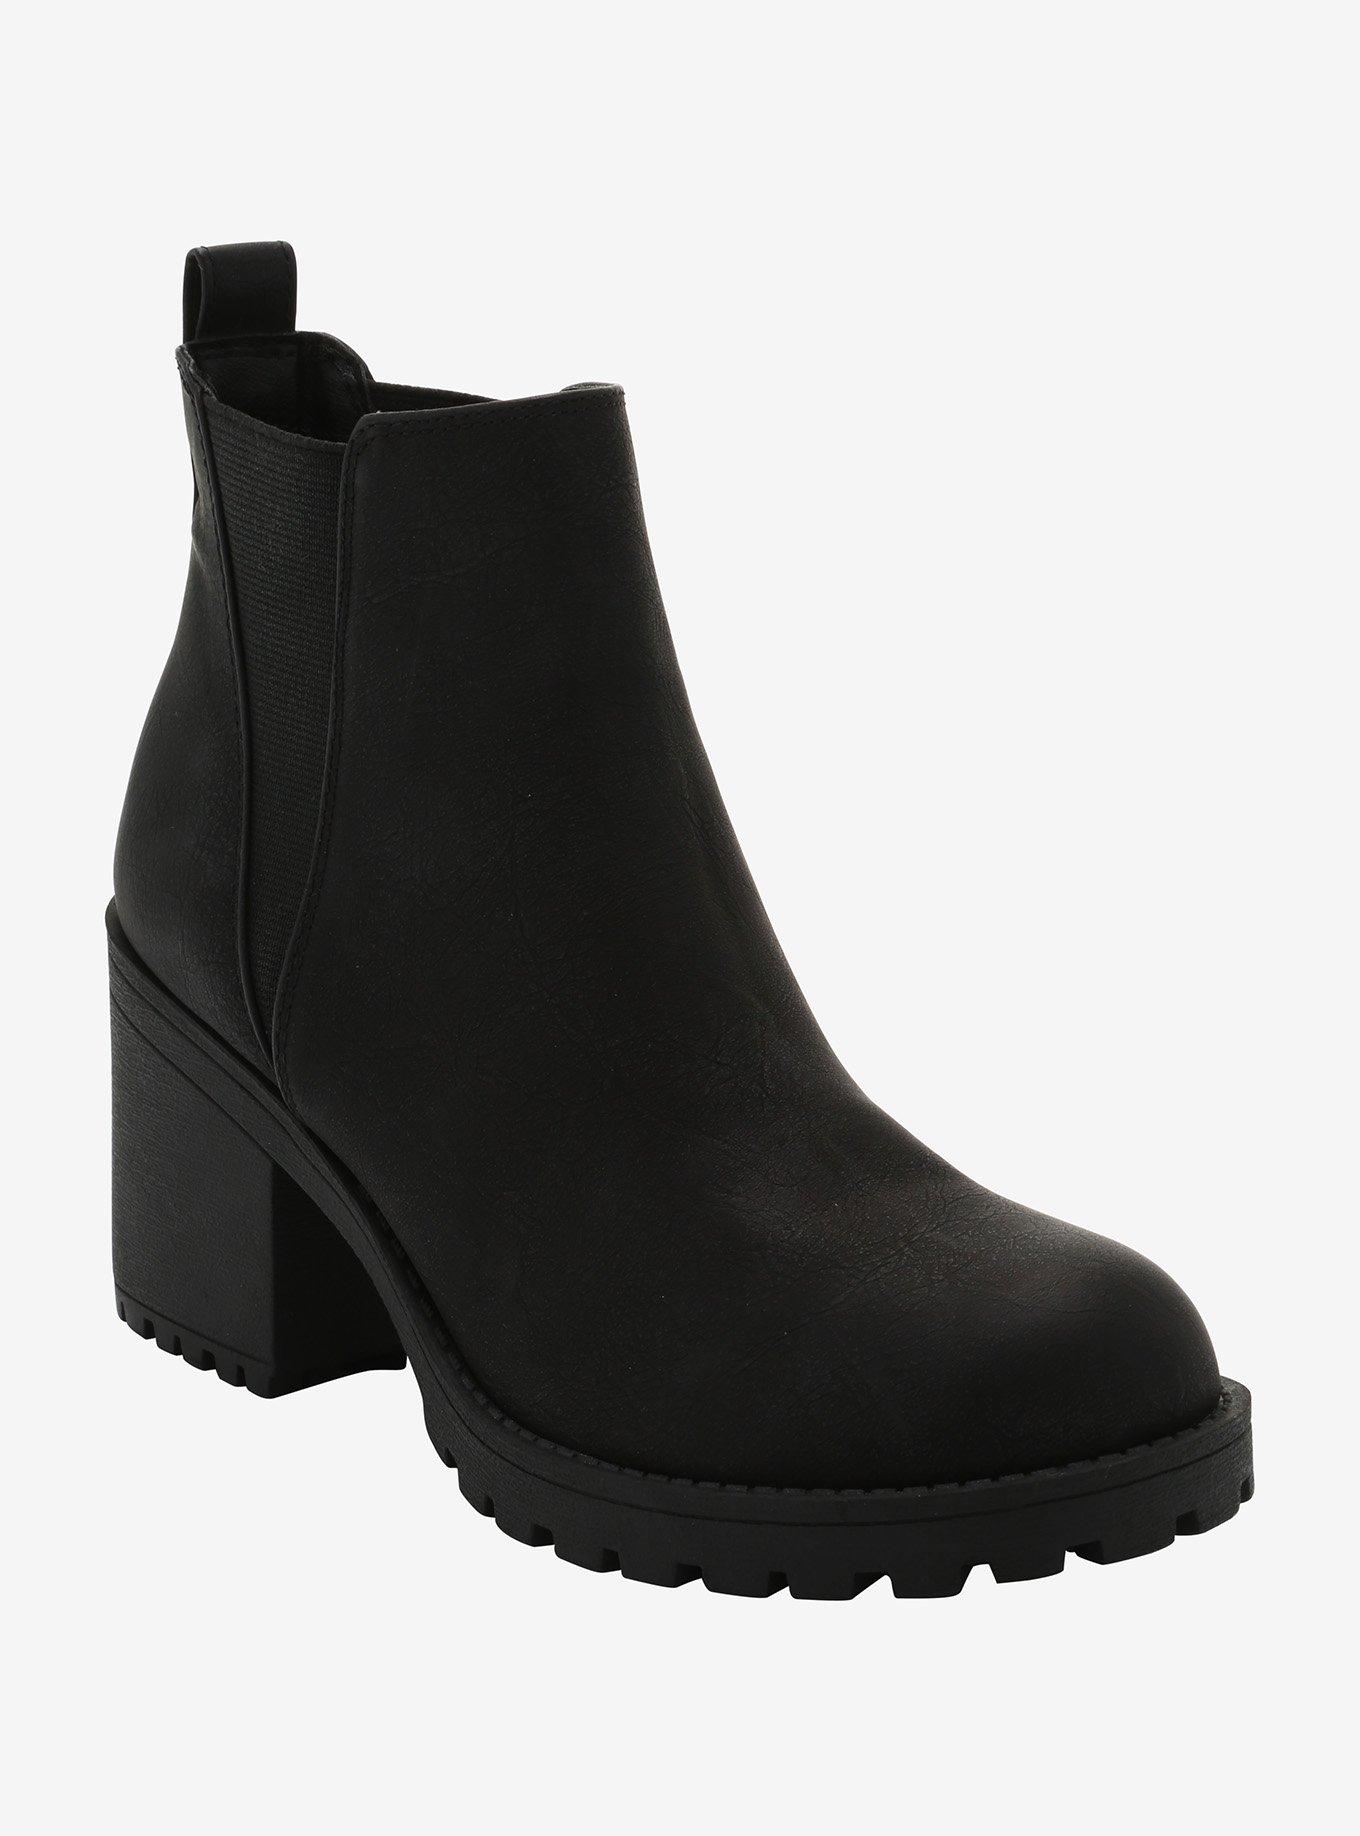 Black Slip-On Heeled Ankle Boots | Hot Topic